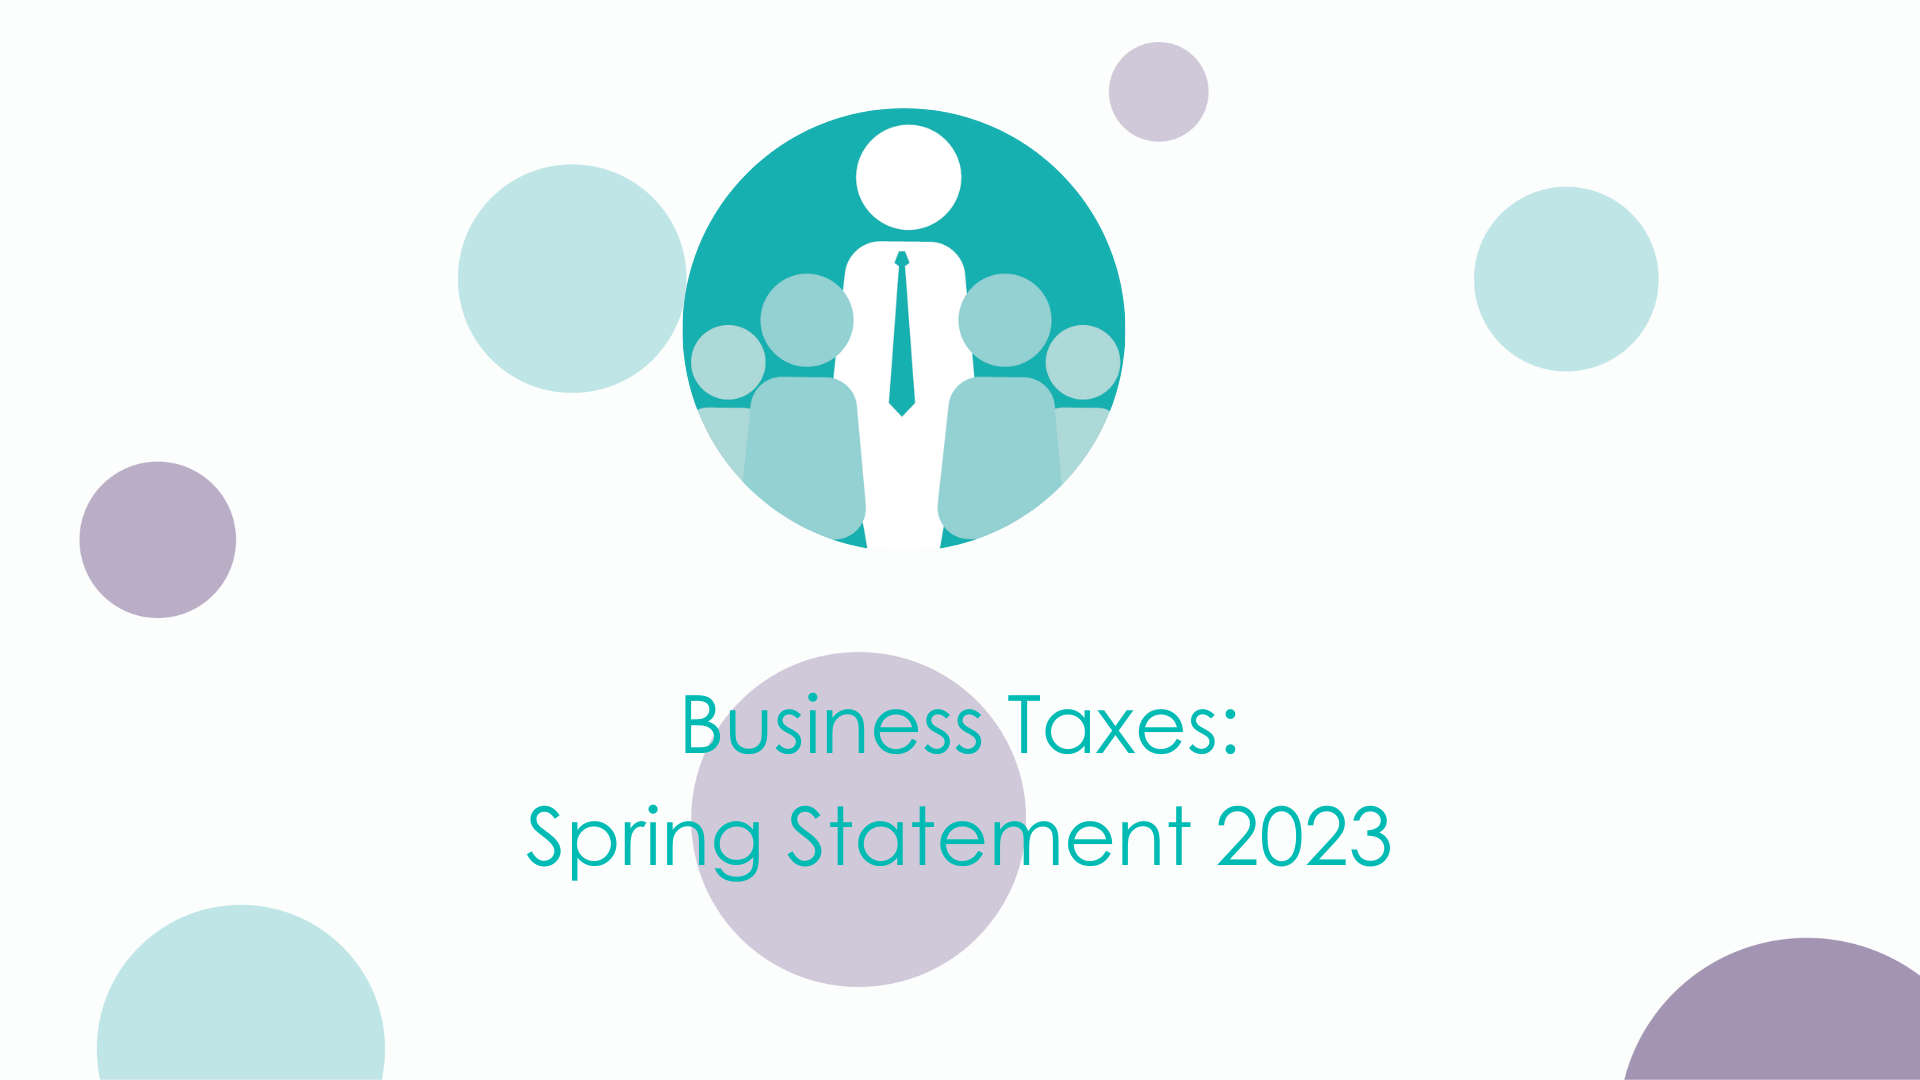 Spring Statement 2023: Business Taxes